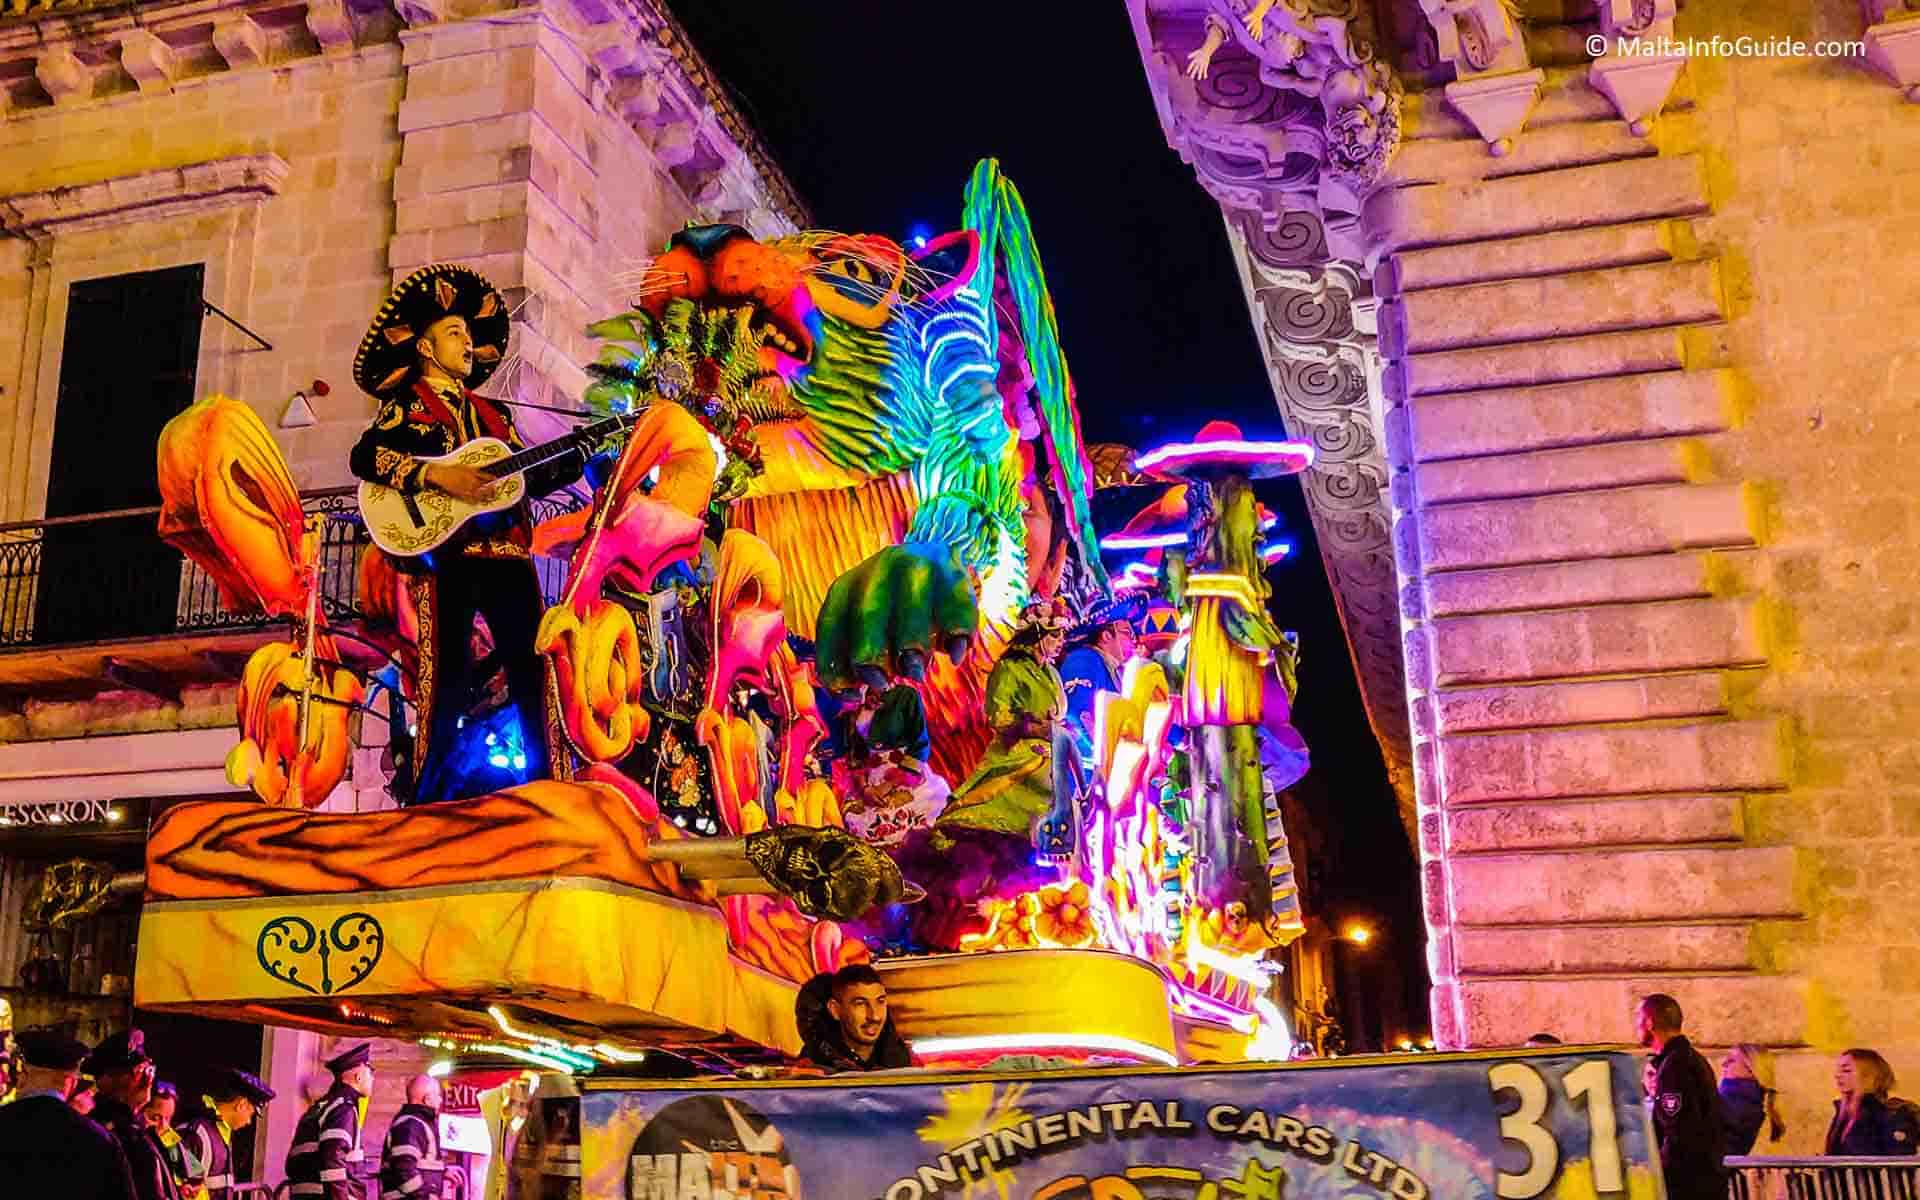 A participant playing the guitar on a carnival float in Malta